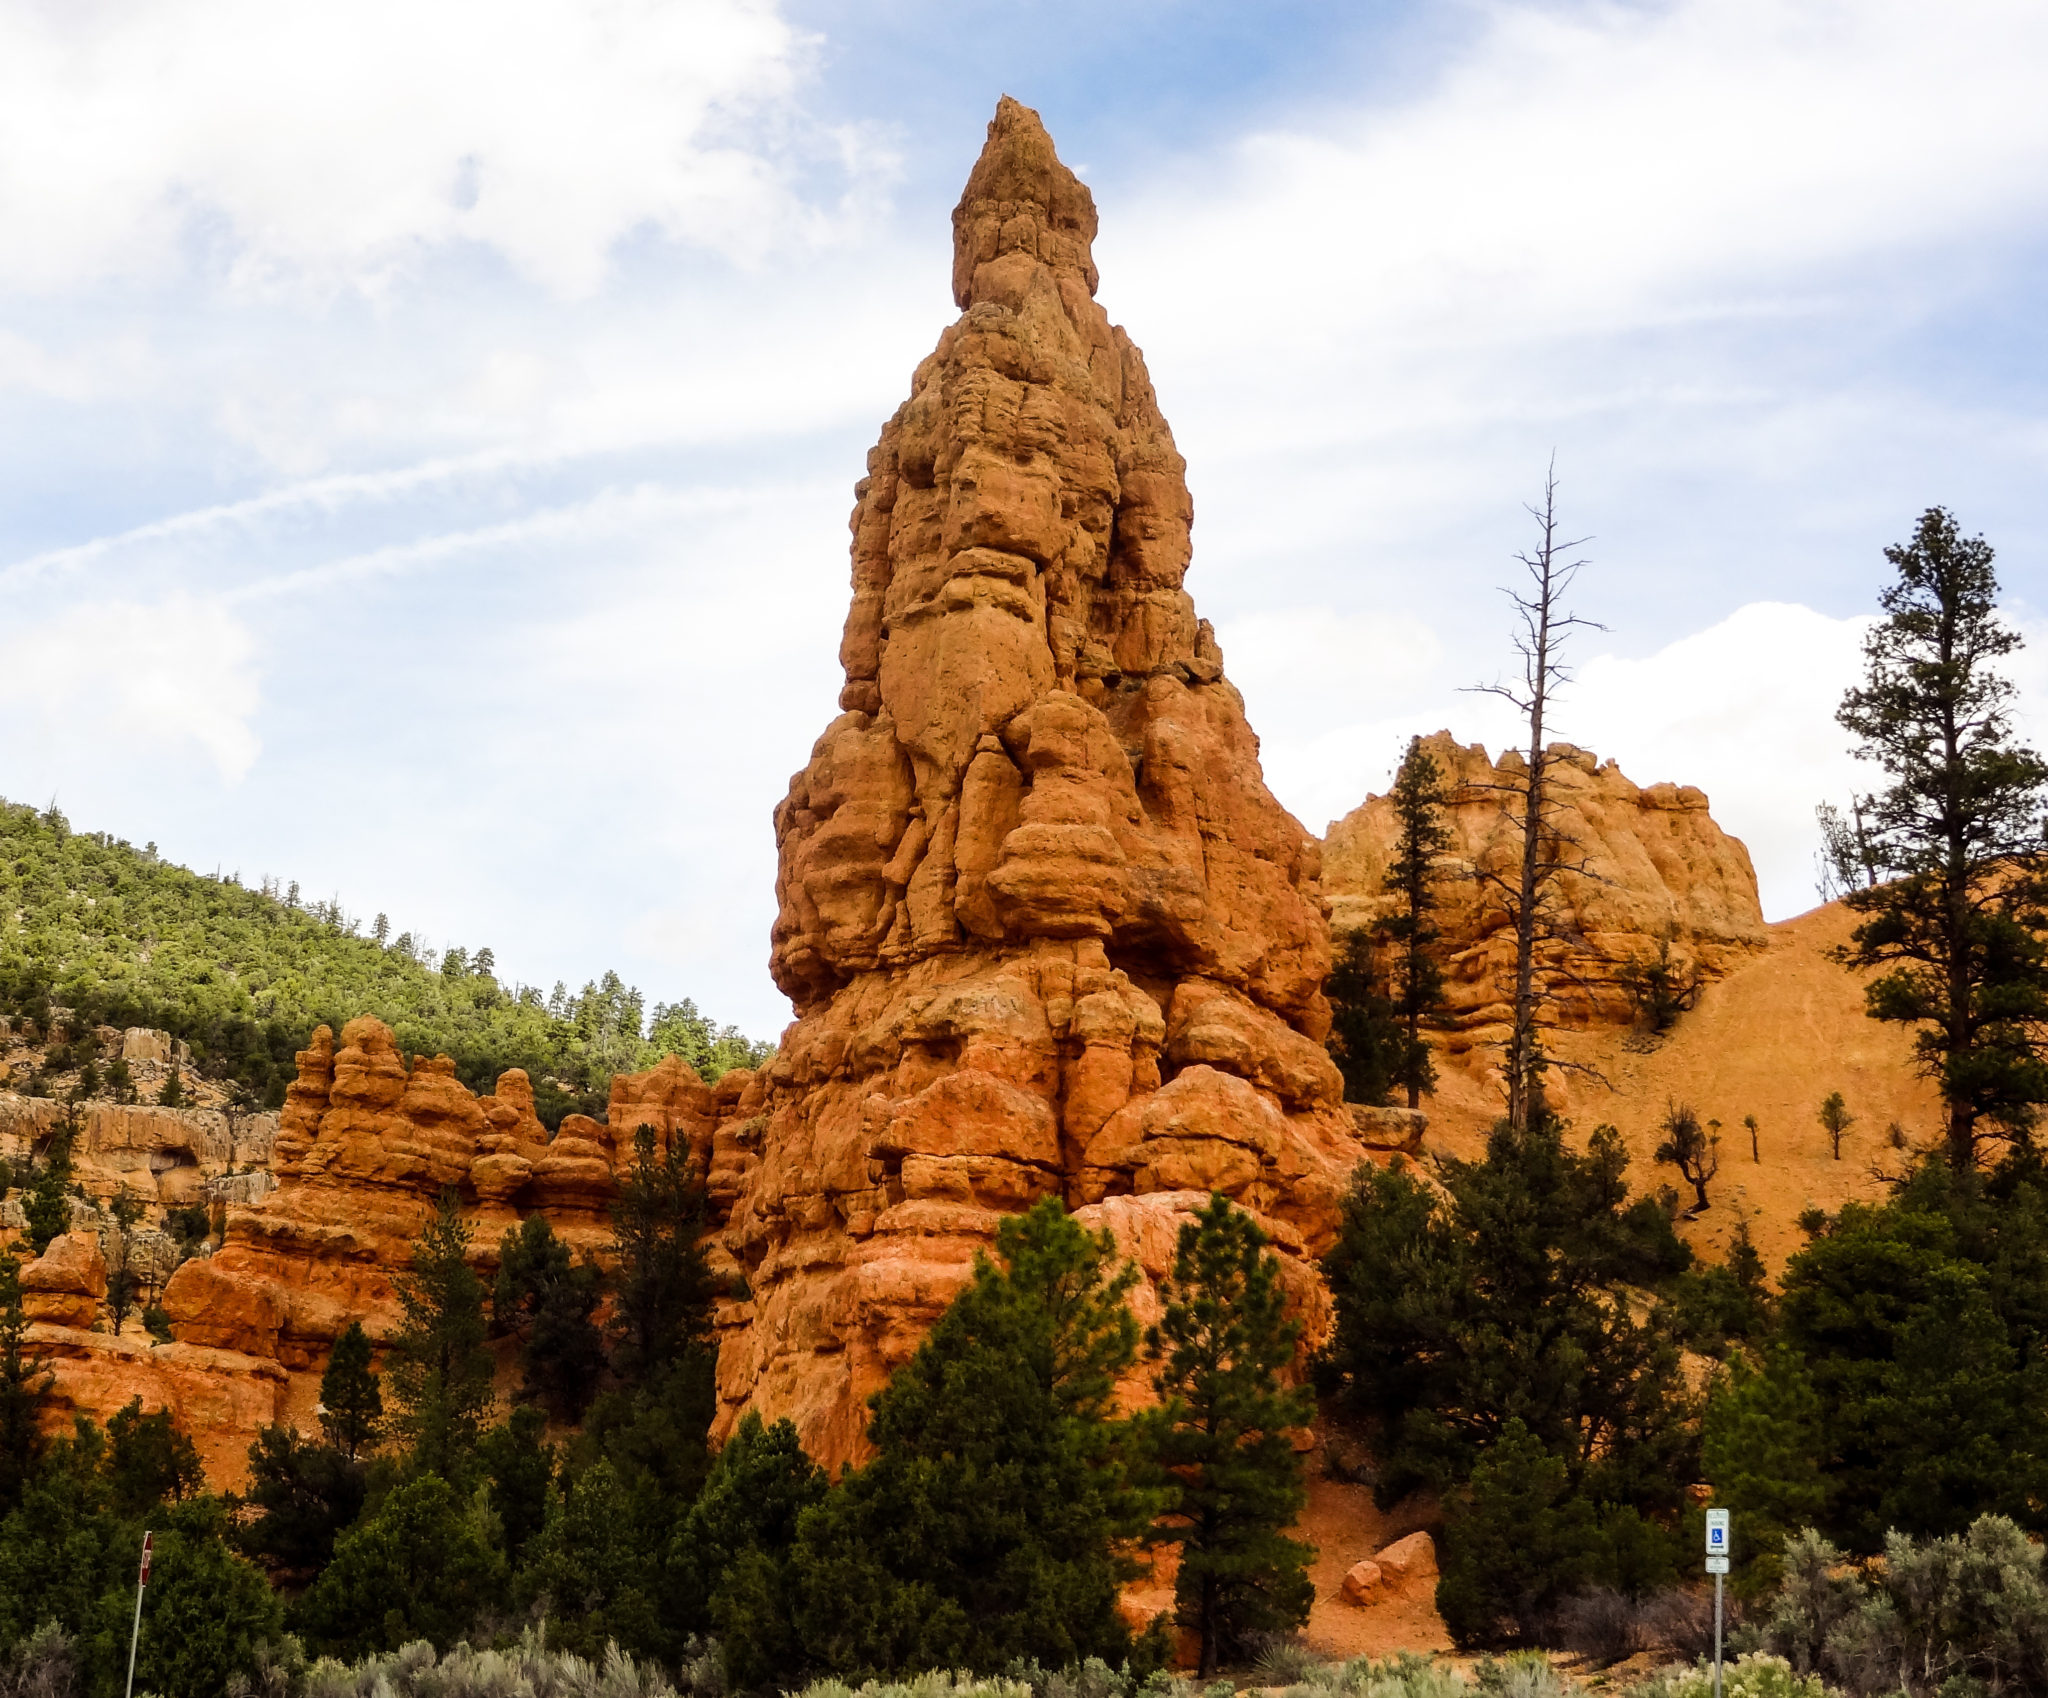 Red Canyon greets you as you approach Bryce Canyon National Park. This was a great surprise on our trip from Cedar Breaks to Bryce Canyon on our road trip from Las Vegas! #ParkTripsAndMore #RoadTrip